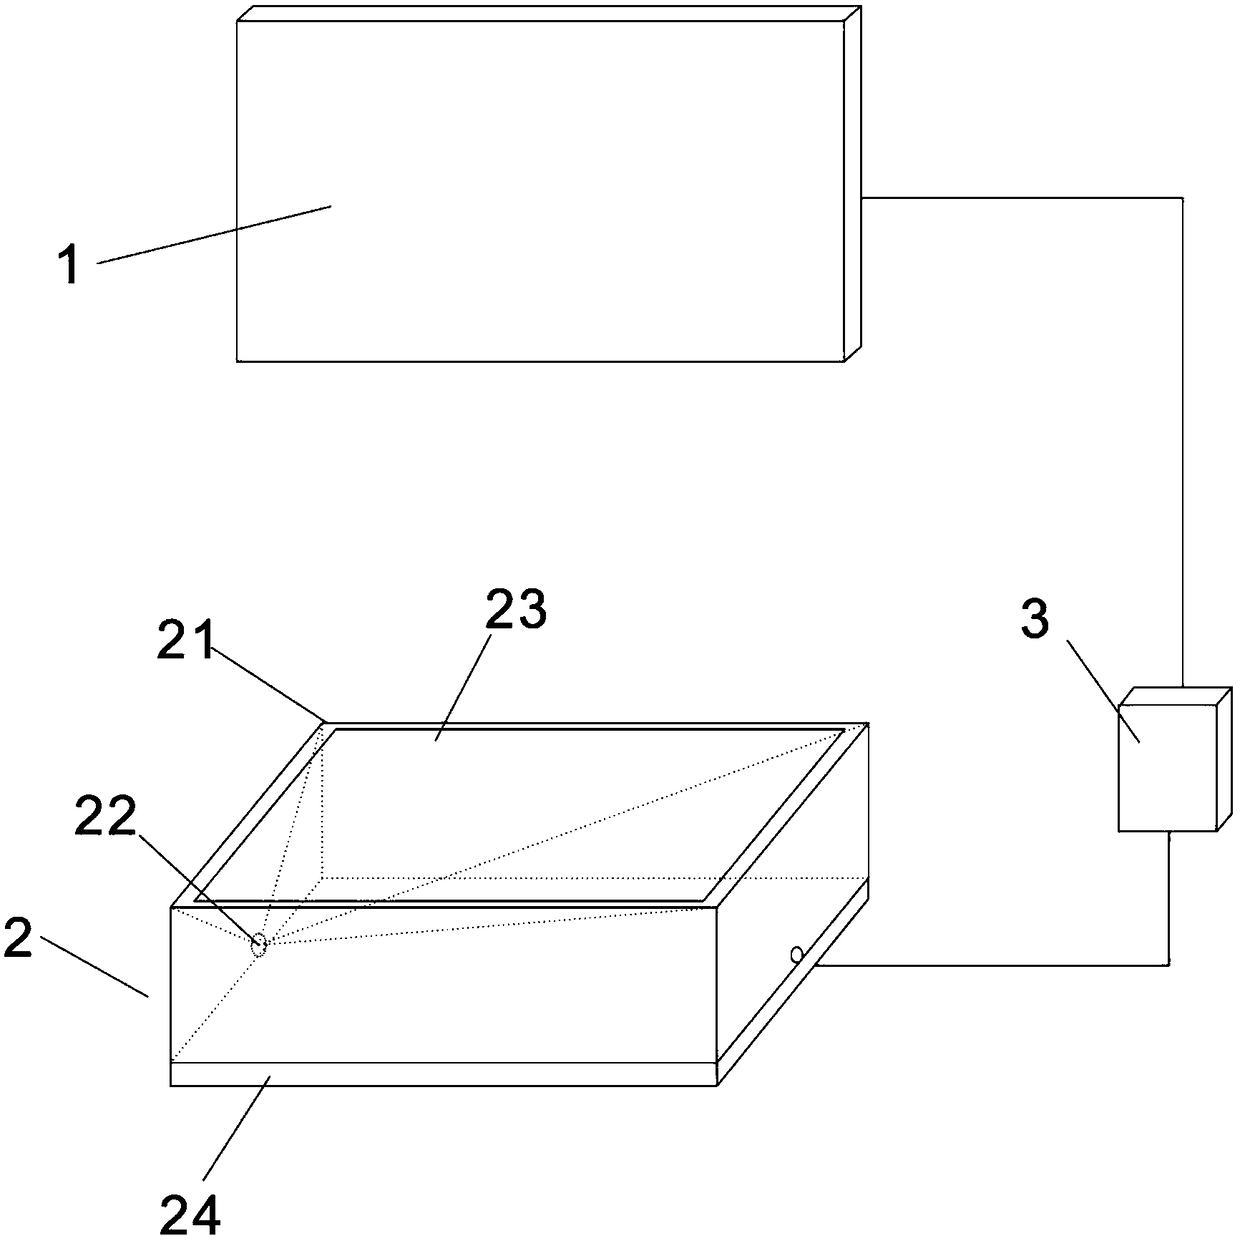 Table and screen interacting system